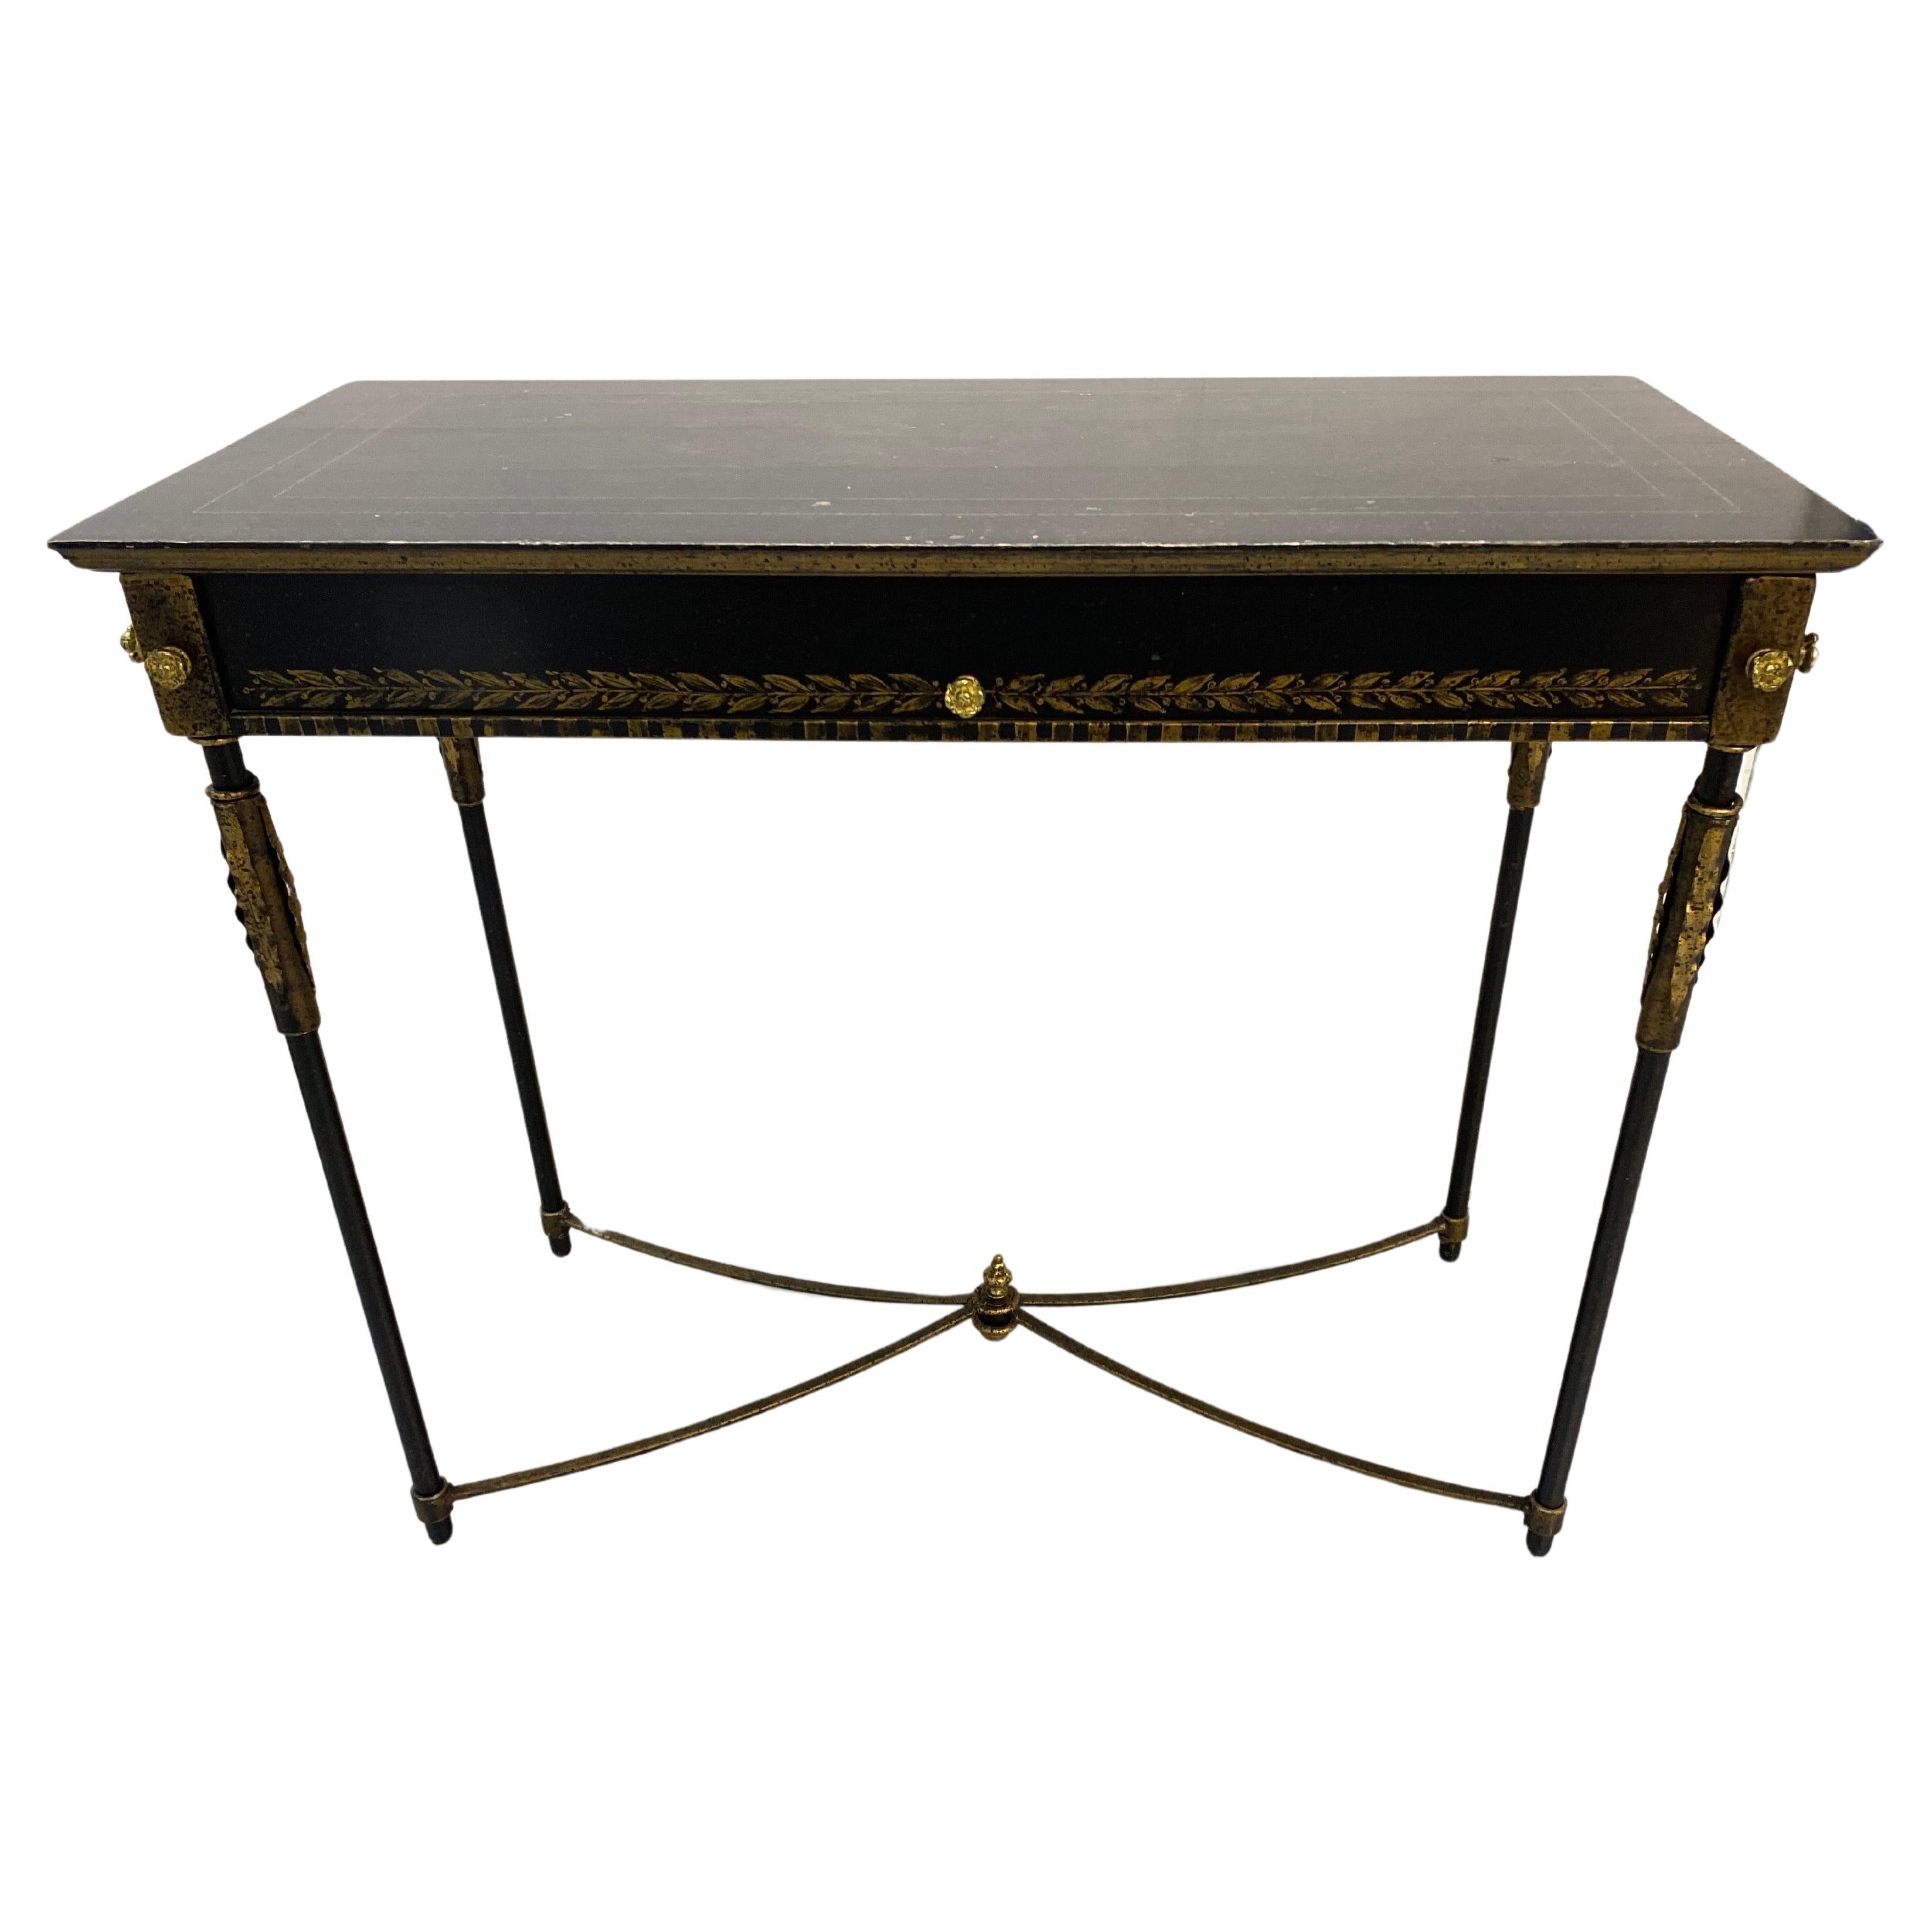 Neoclassical Style Table with Painted Decoration by Art & Commerce For Sale